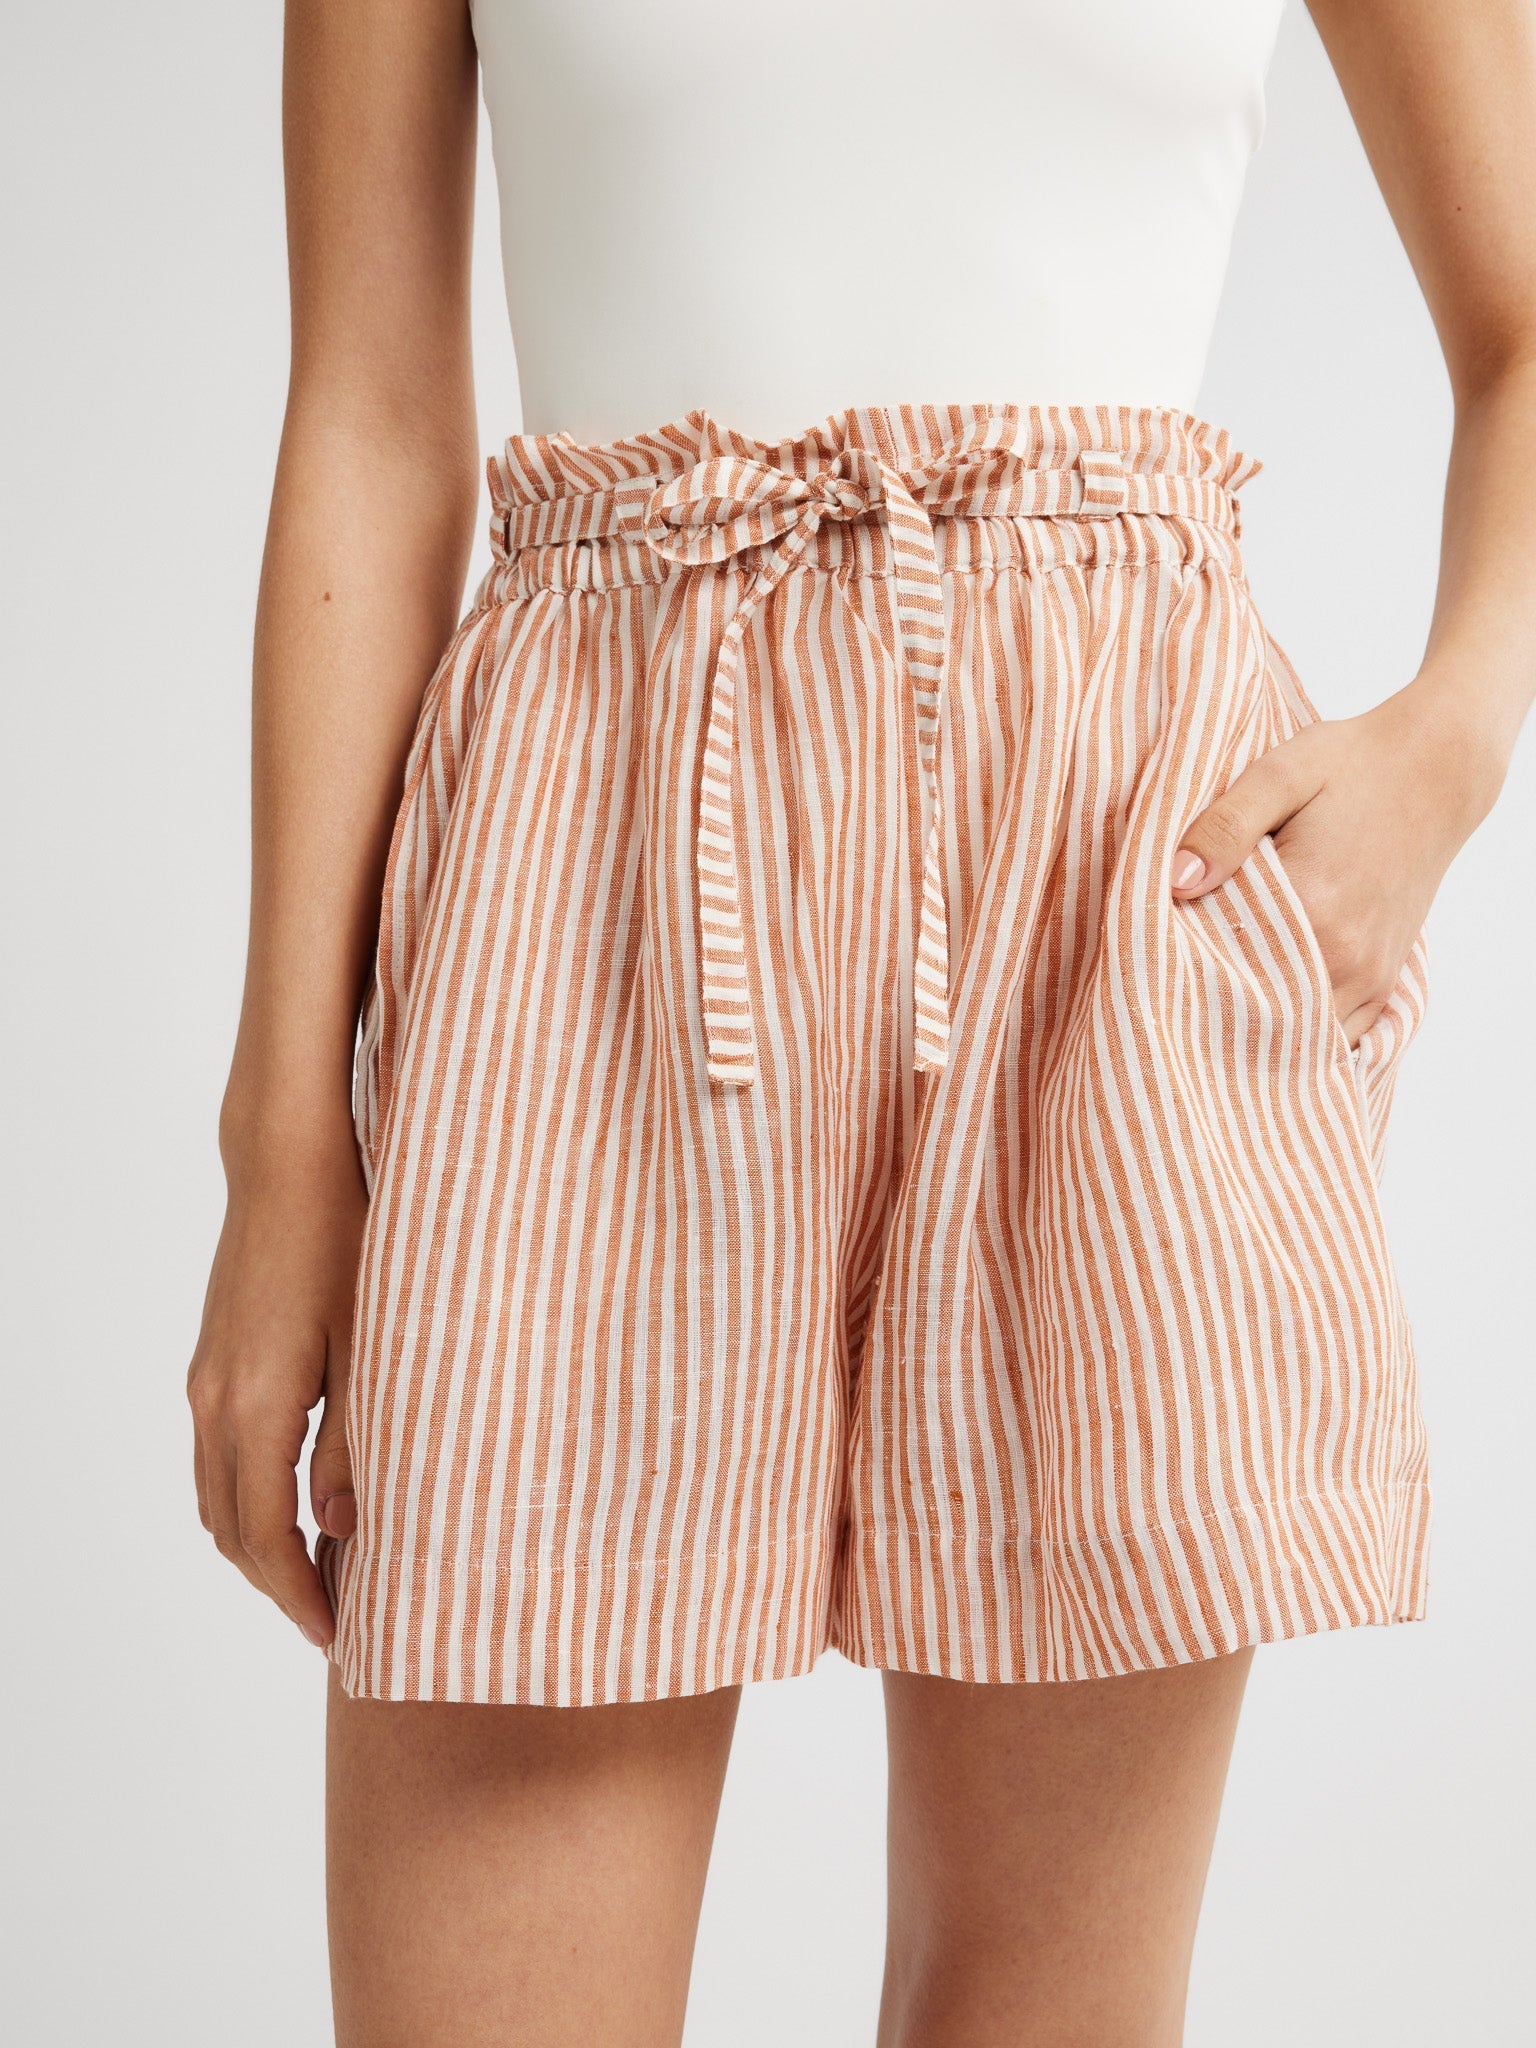 MILLE Clothing Cary Short in Siena Stripe